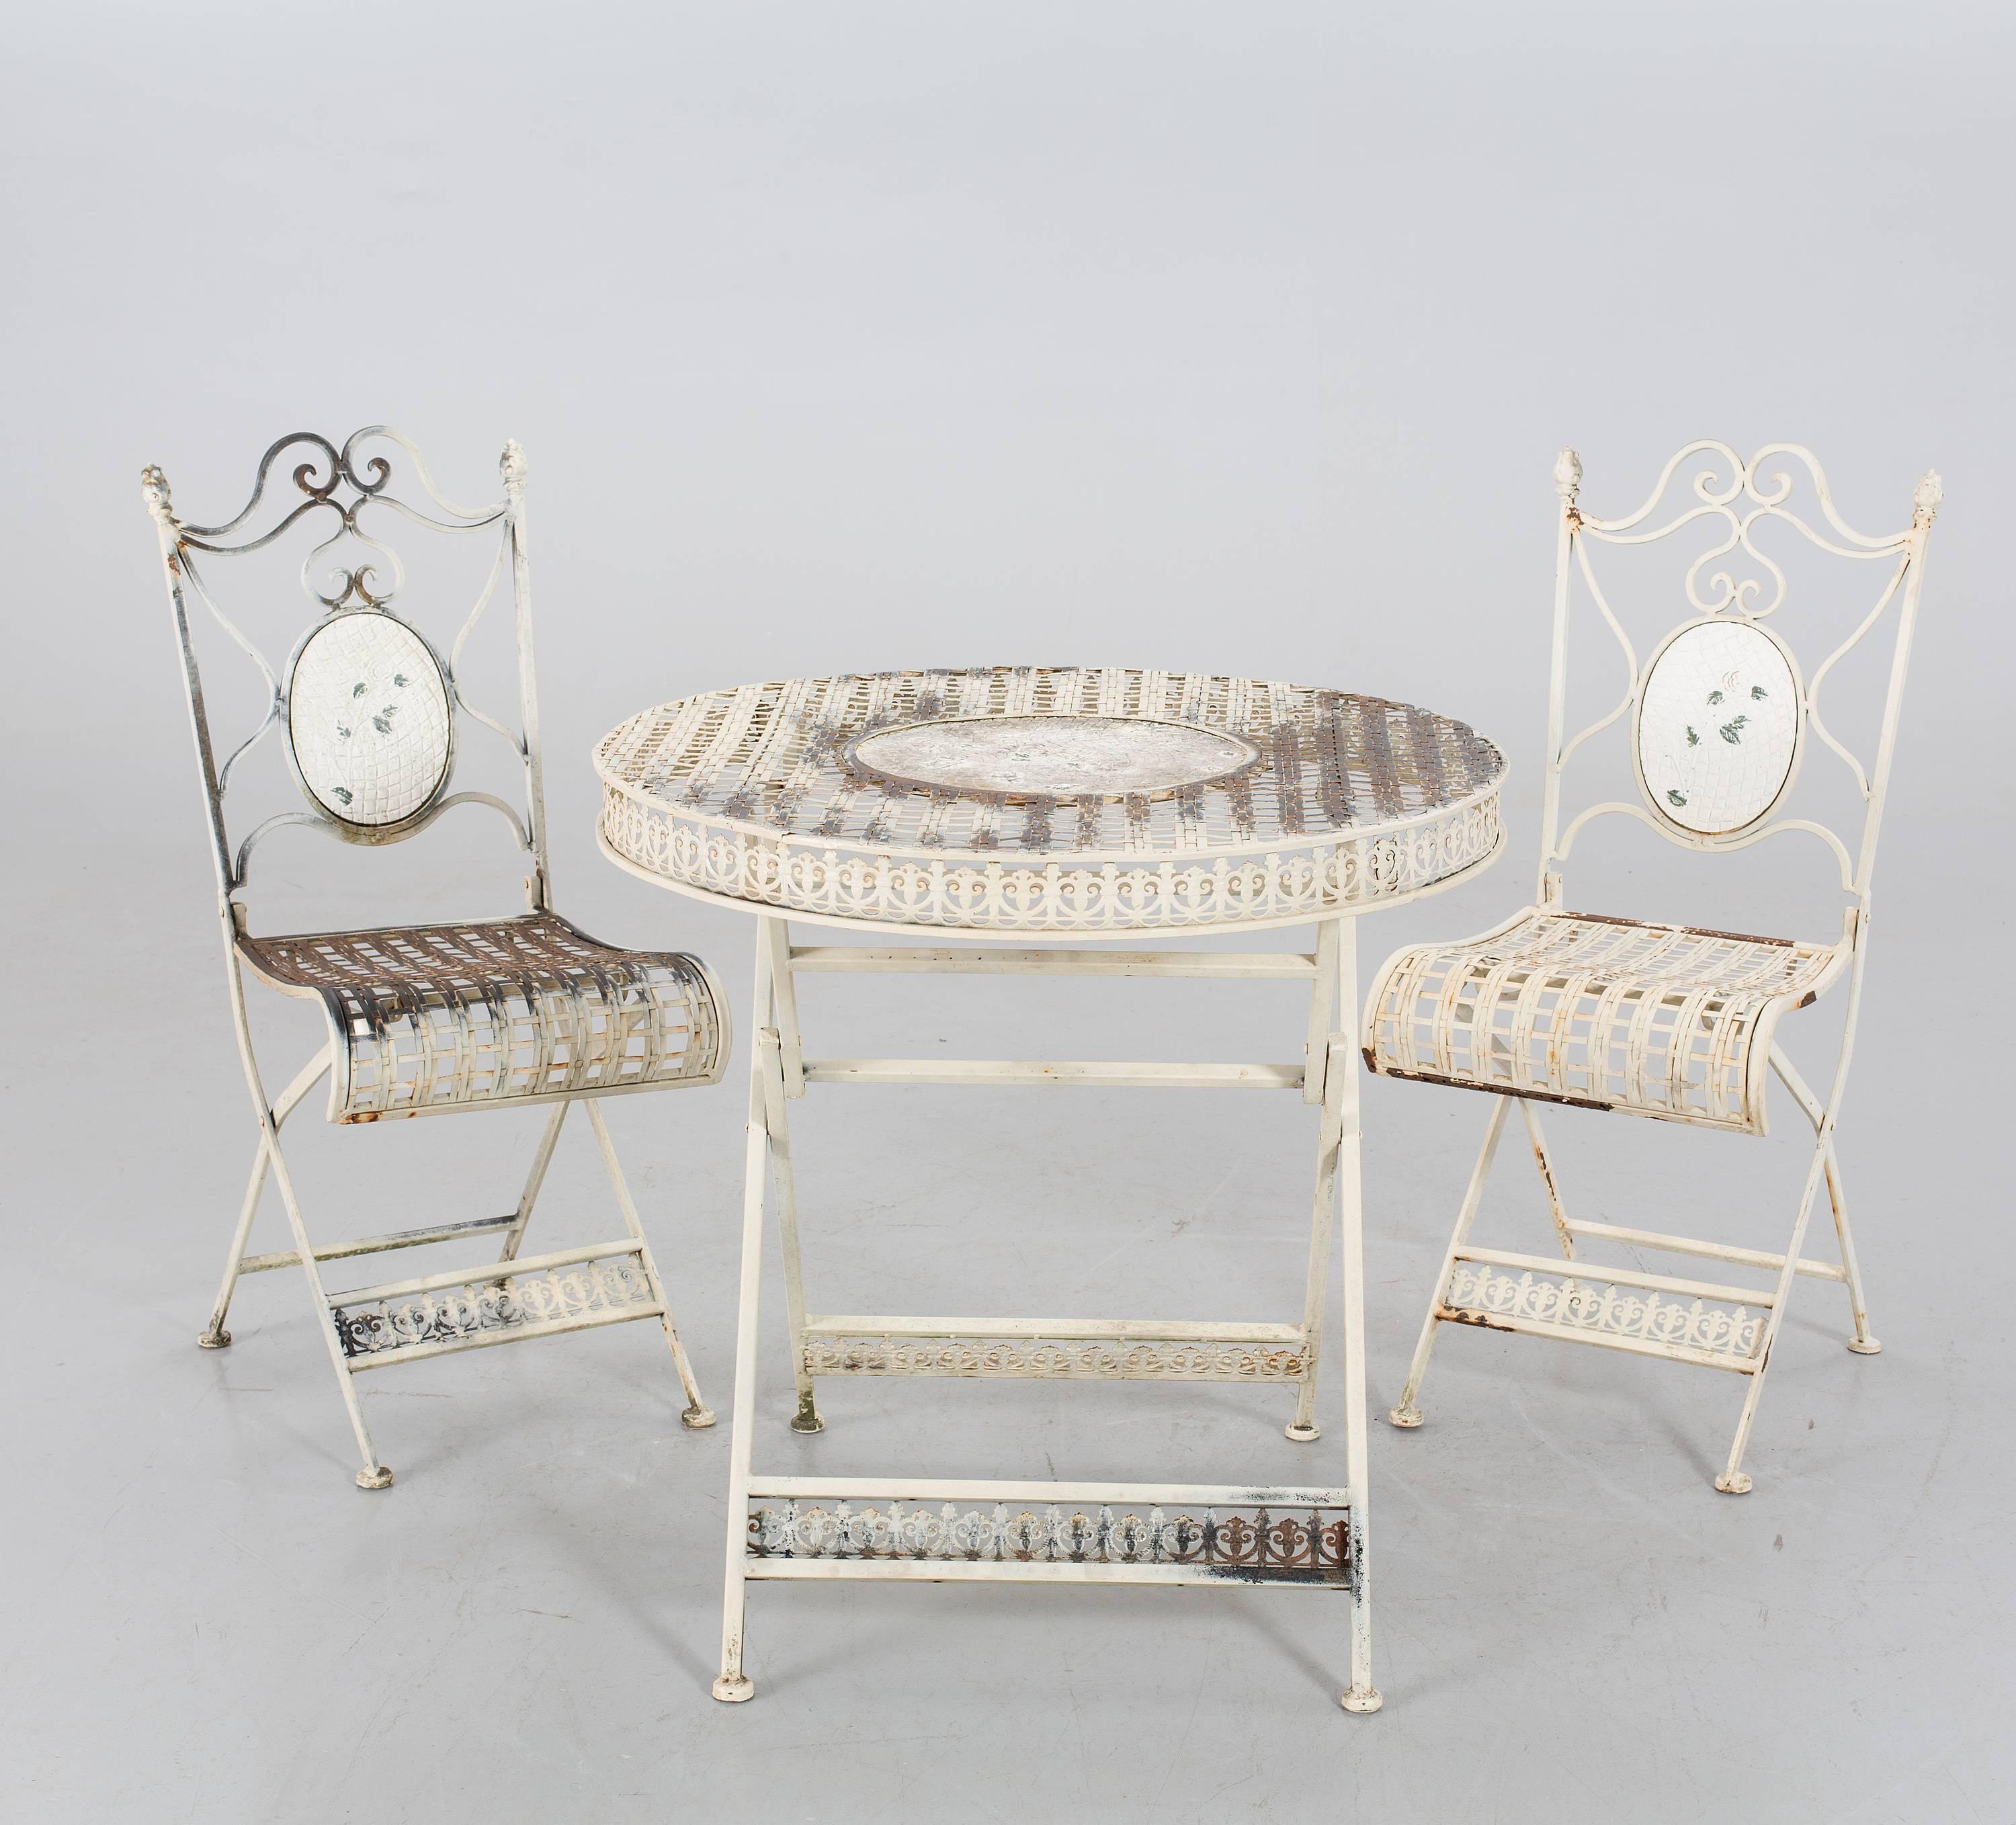 French cast iron garden furniture, France, early 1900s.